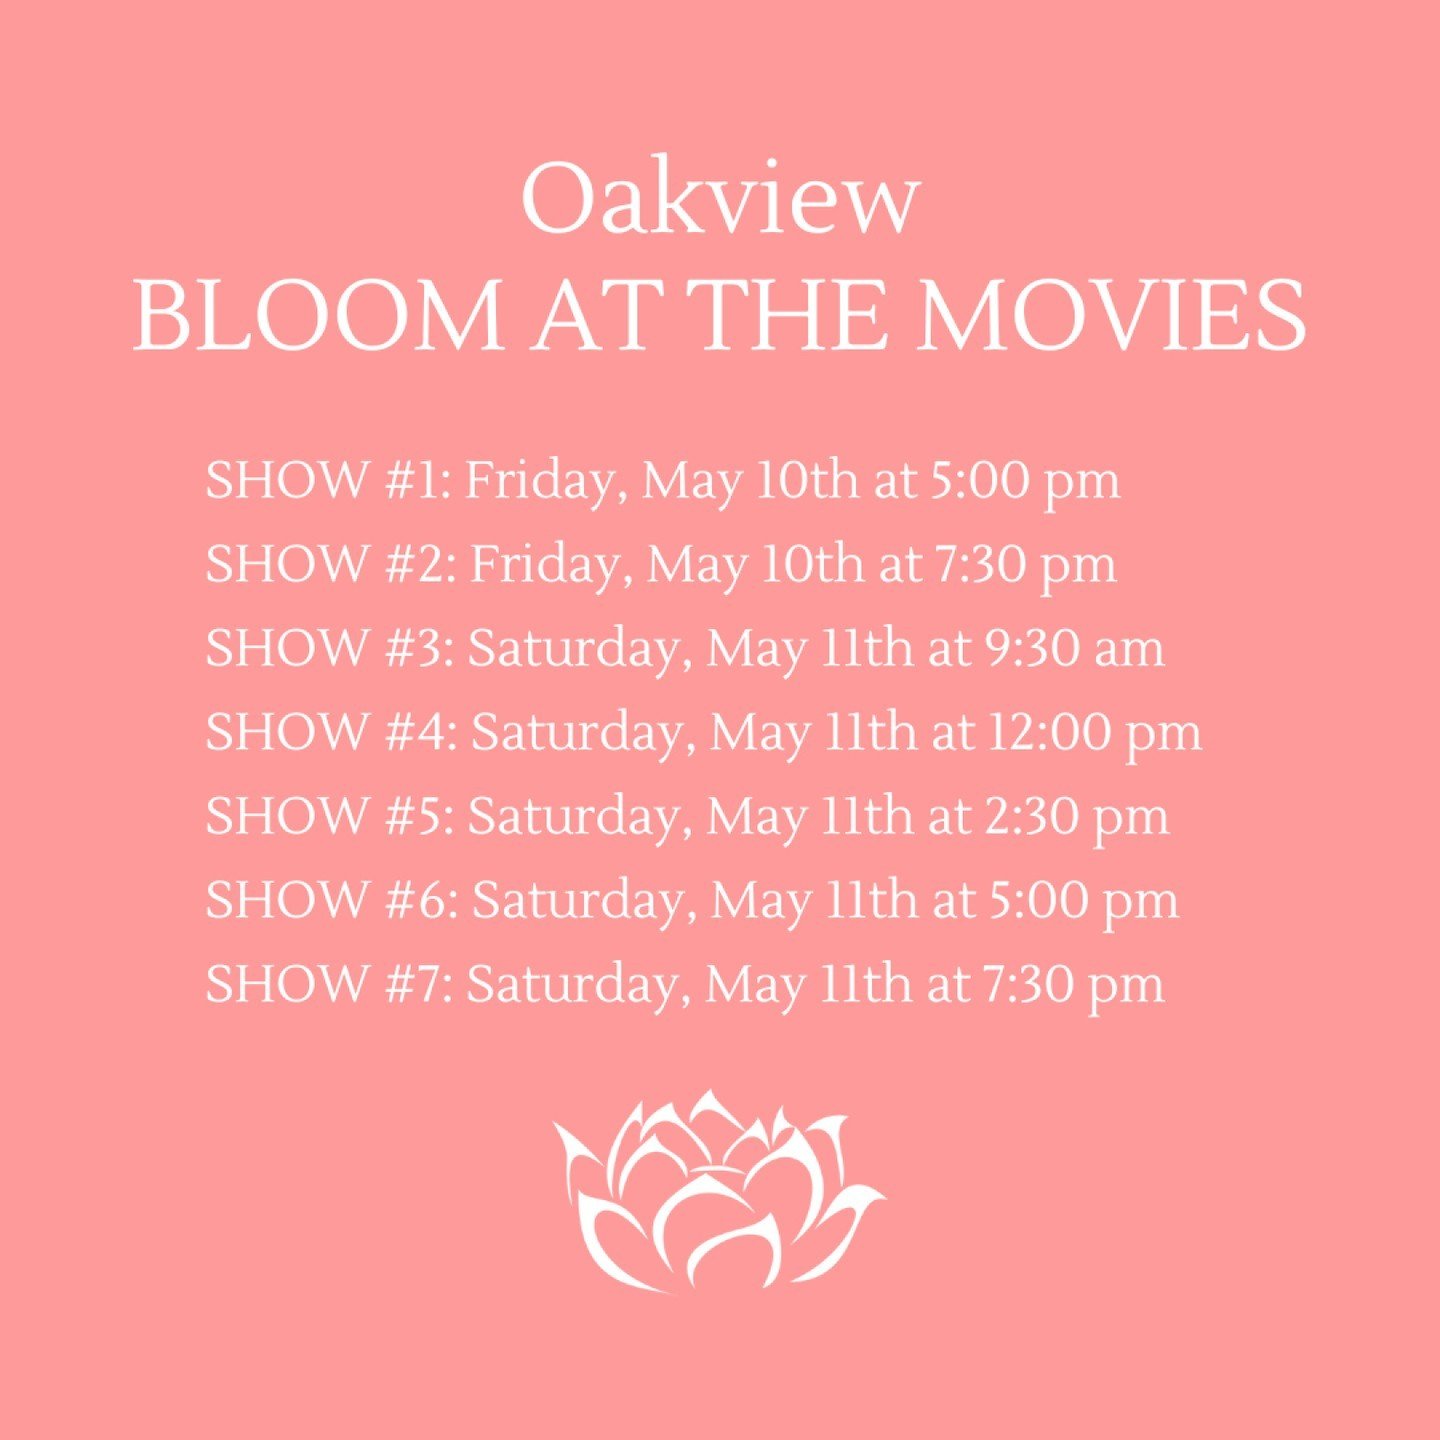 We&rsquo;re excited for our Oakview Bloom at the Movies Spring Recital happening this weekend! We couldn't be prouder of our dancers and all the hard work they've put in to make this moment unforgettable. Let's show them our support and fill the audi